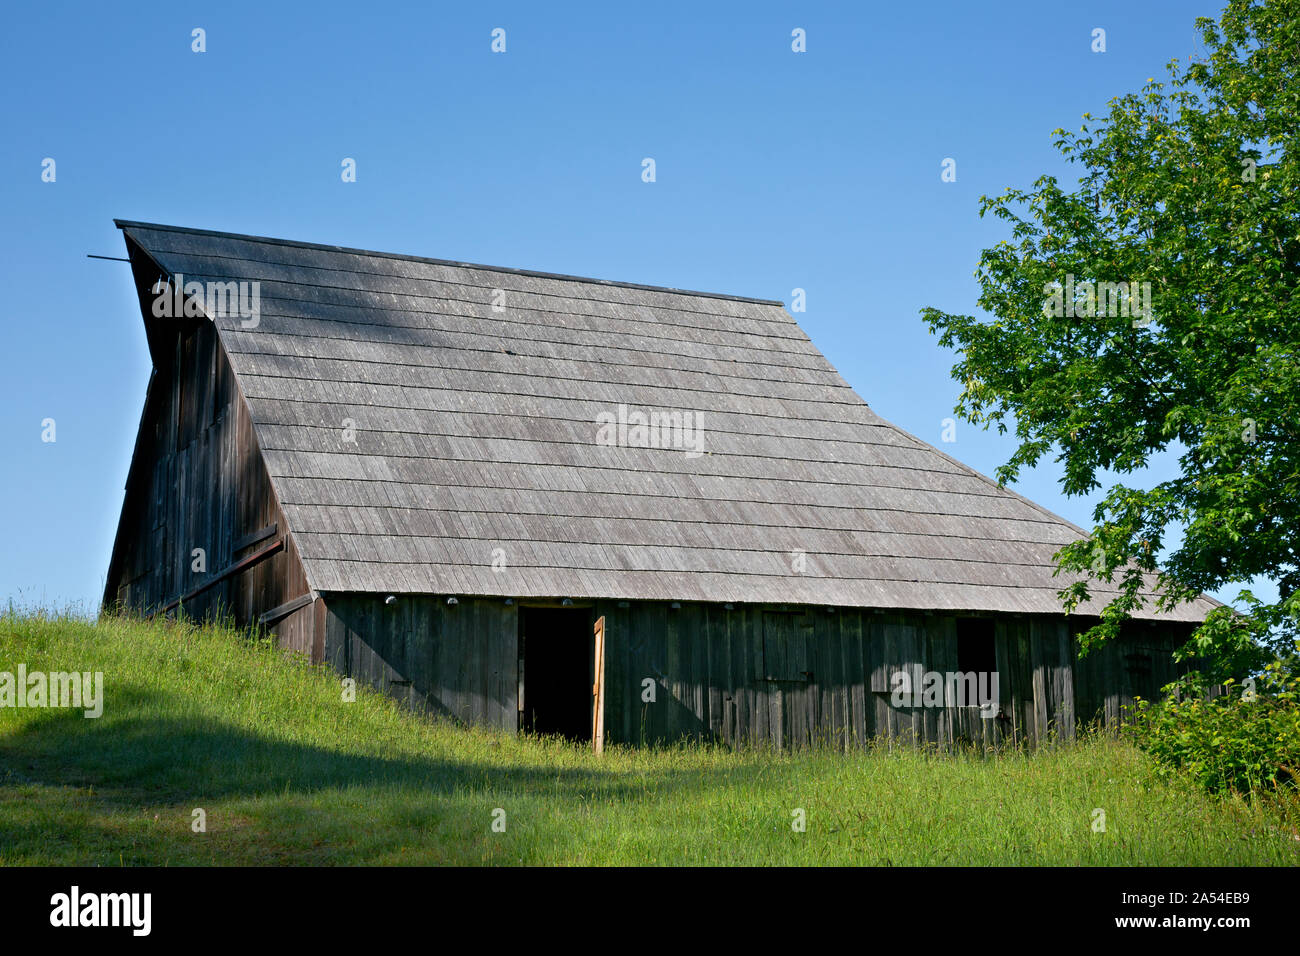 CA03731-00...CALIFORNIA - Barn at historic Lyons Sheep Ranch located in the Bald Hills section of Redwoods National Park. Stock Photo